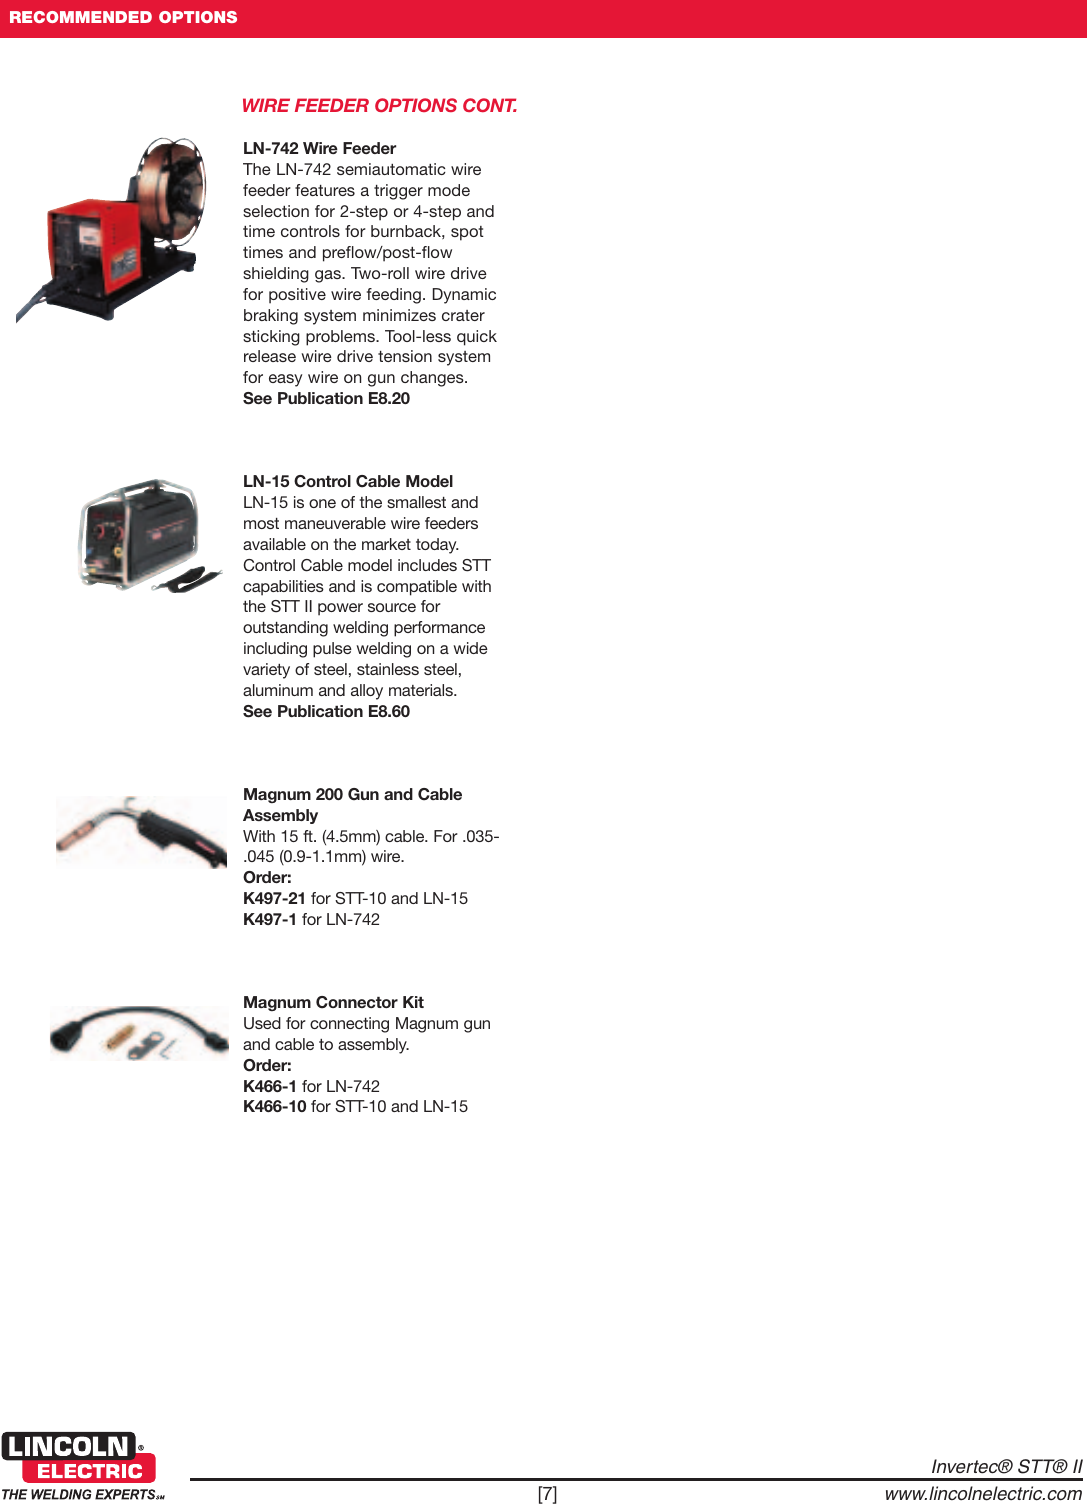 Page 7 of 8 - Lincoln-Electric Lincoln-Electric-Invertec-Stt-Ii-Users-Manual- MIG Welders  Lincoln-electric-invertec-stt-ii-users-manual